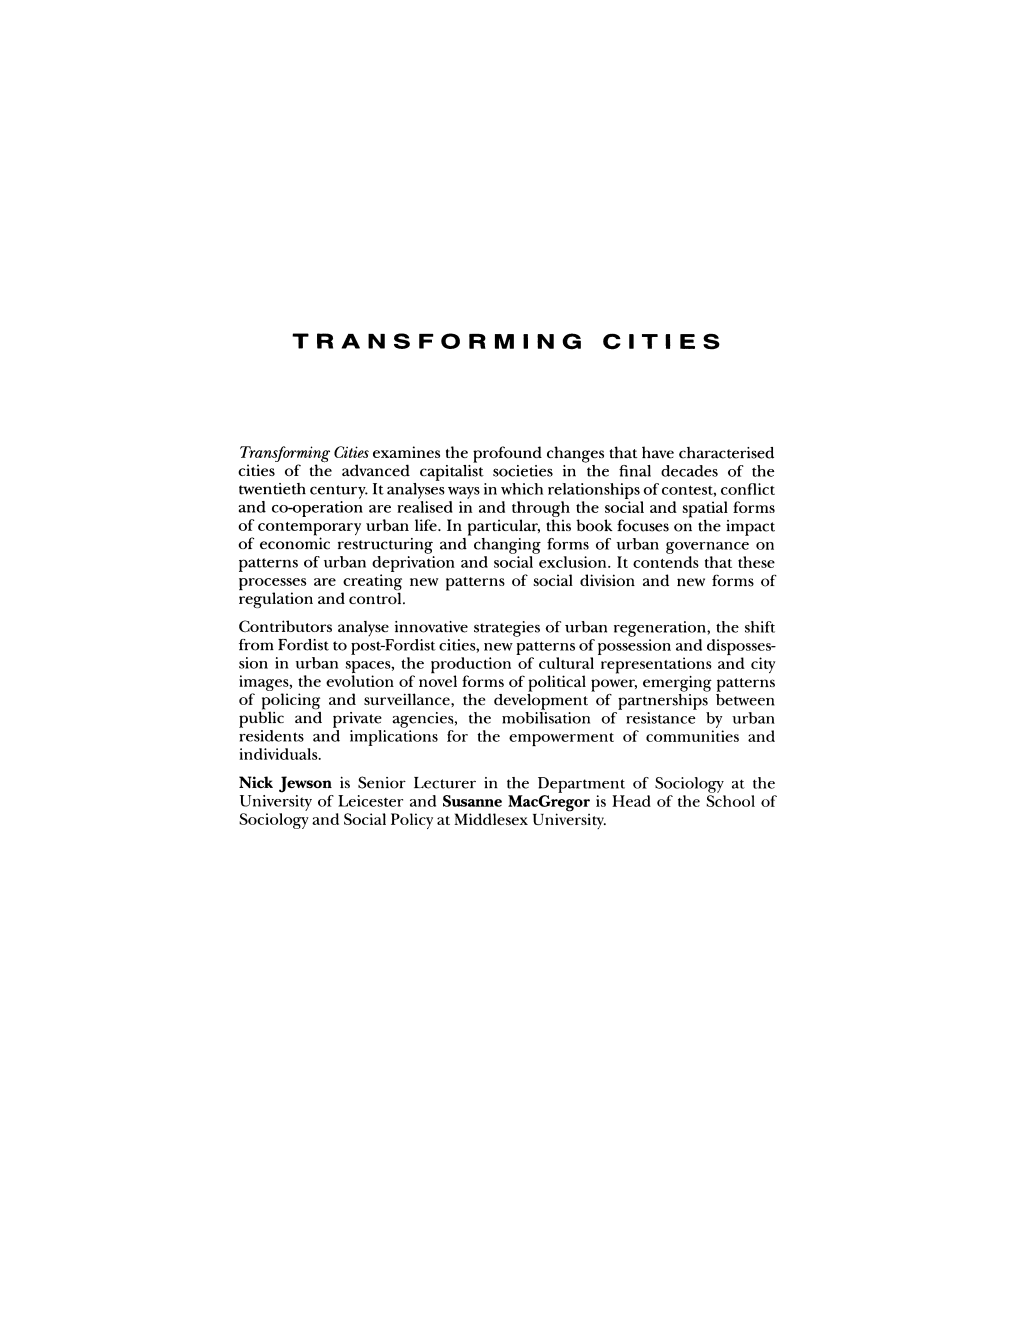 TRANSFORMING CITIES: Contested Governance and New Spatial Divisions